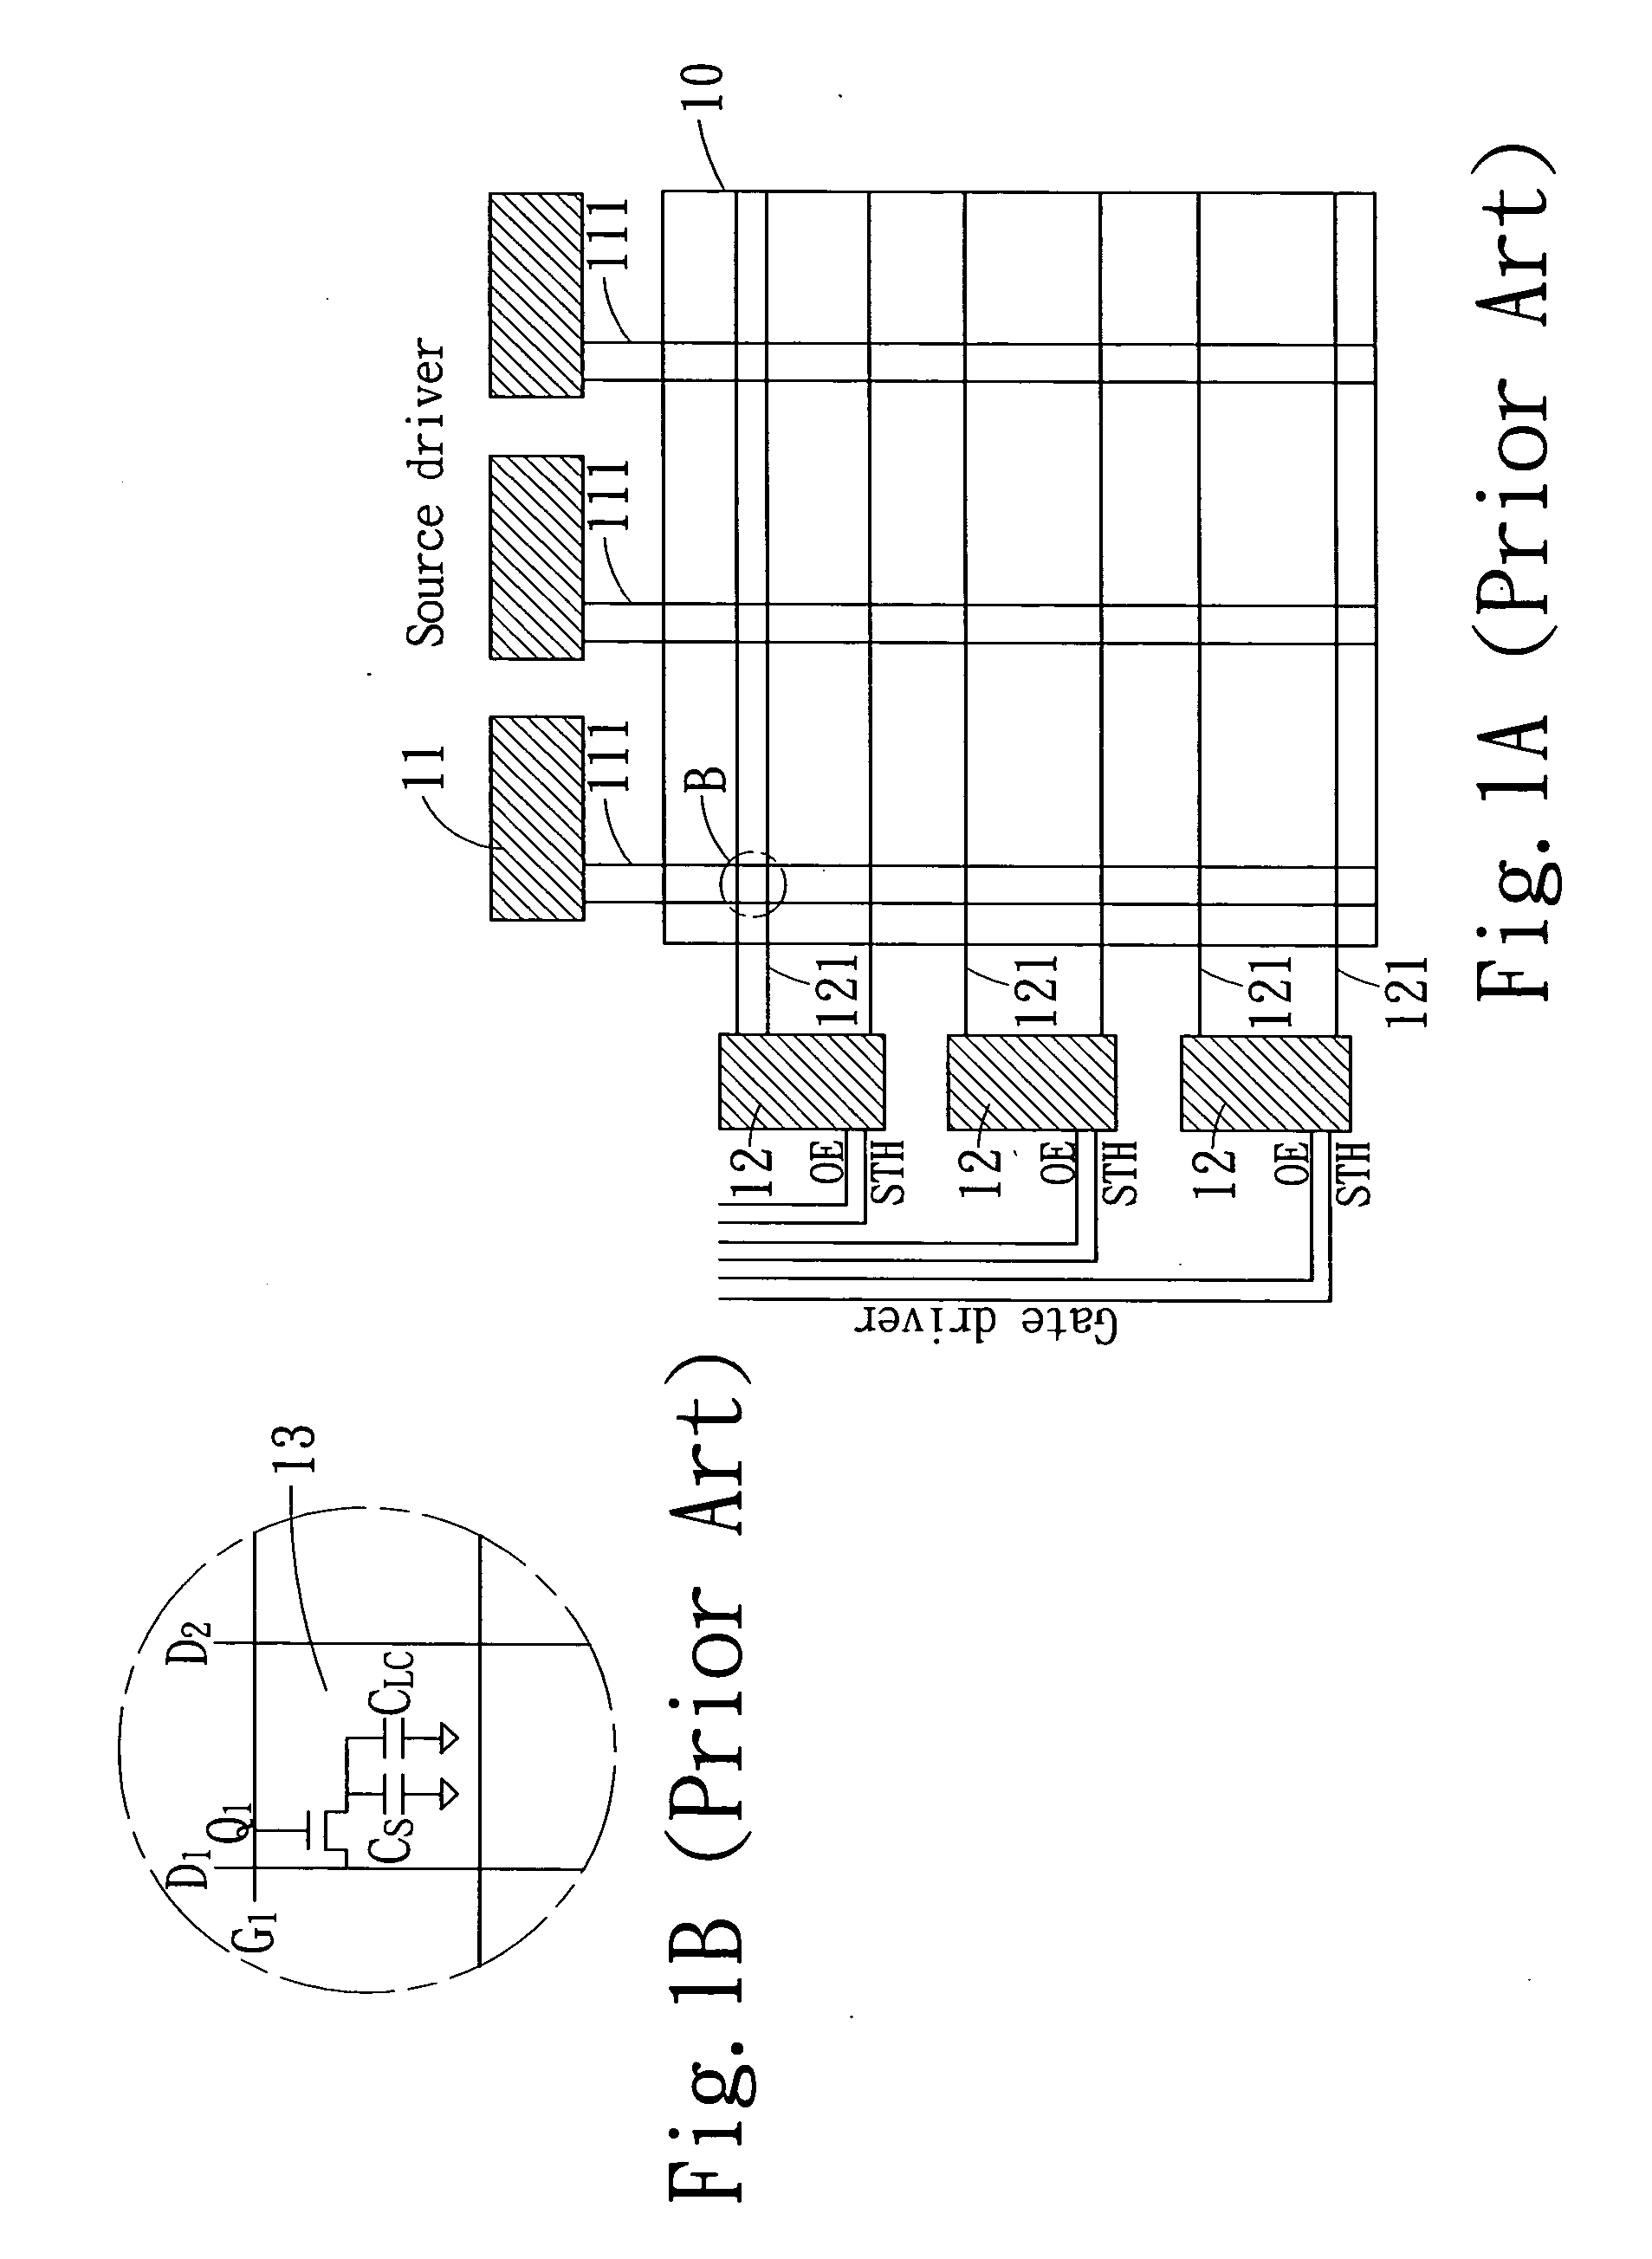 Driving device for quickly changing the gray level of the liquid crystal display and its driving method